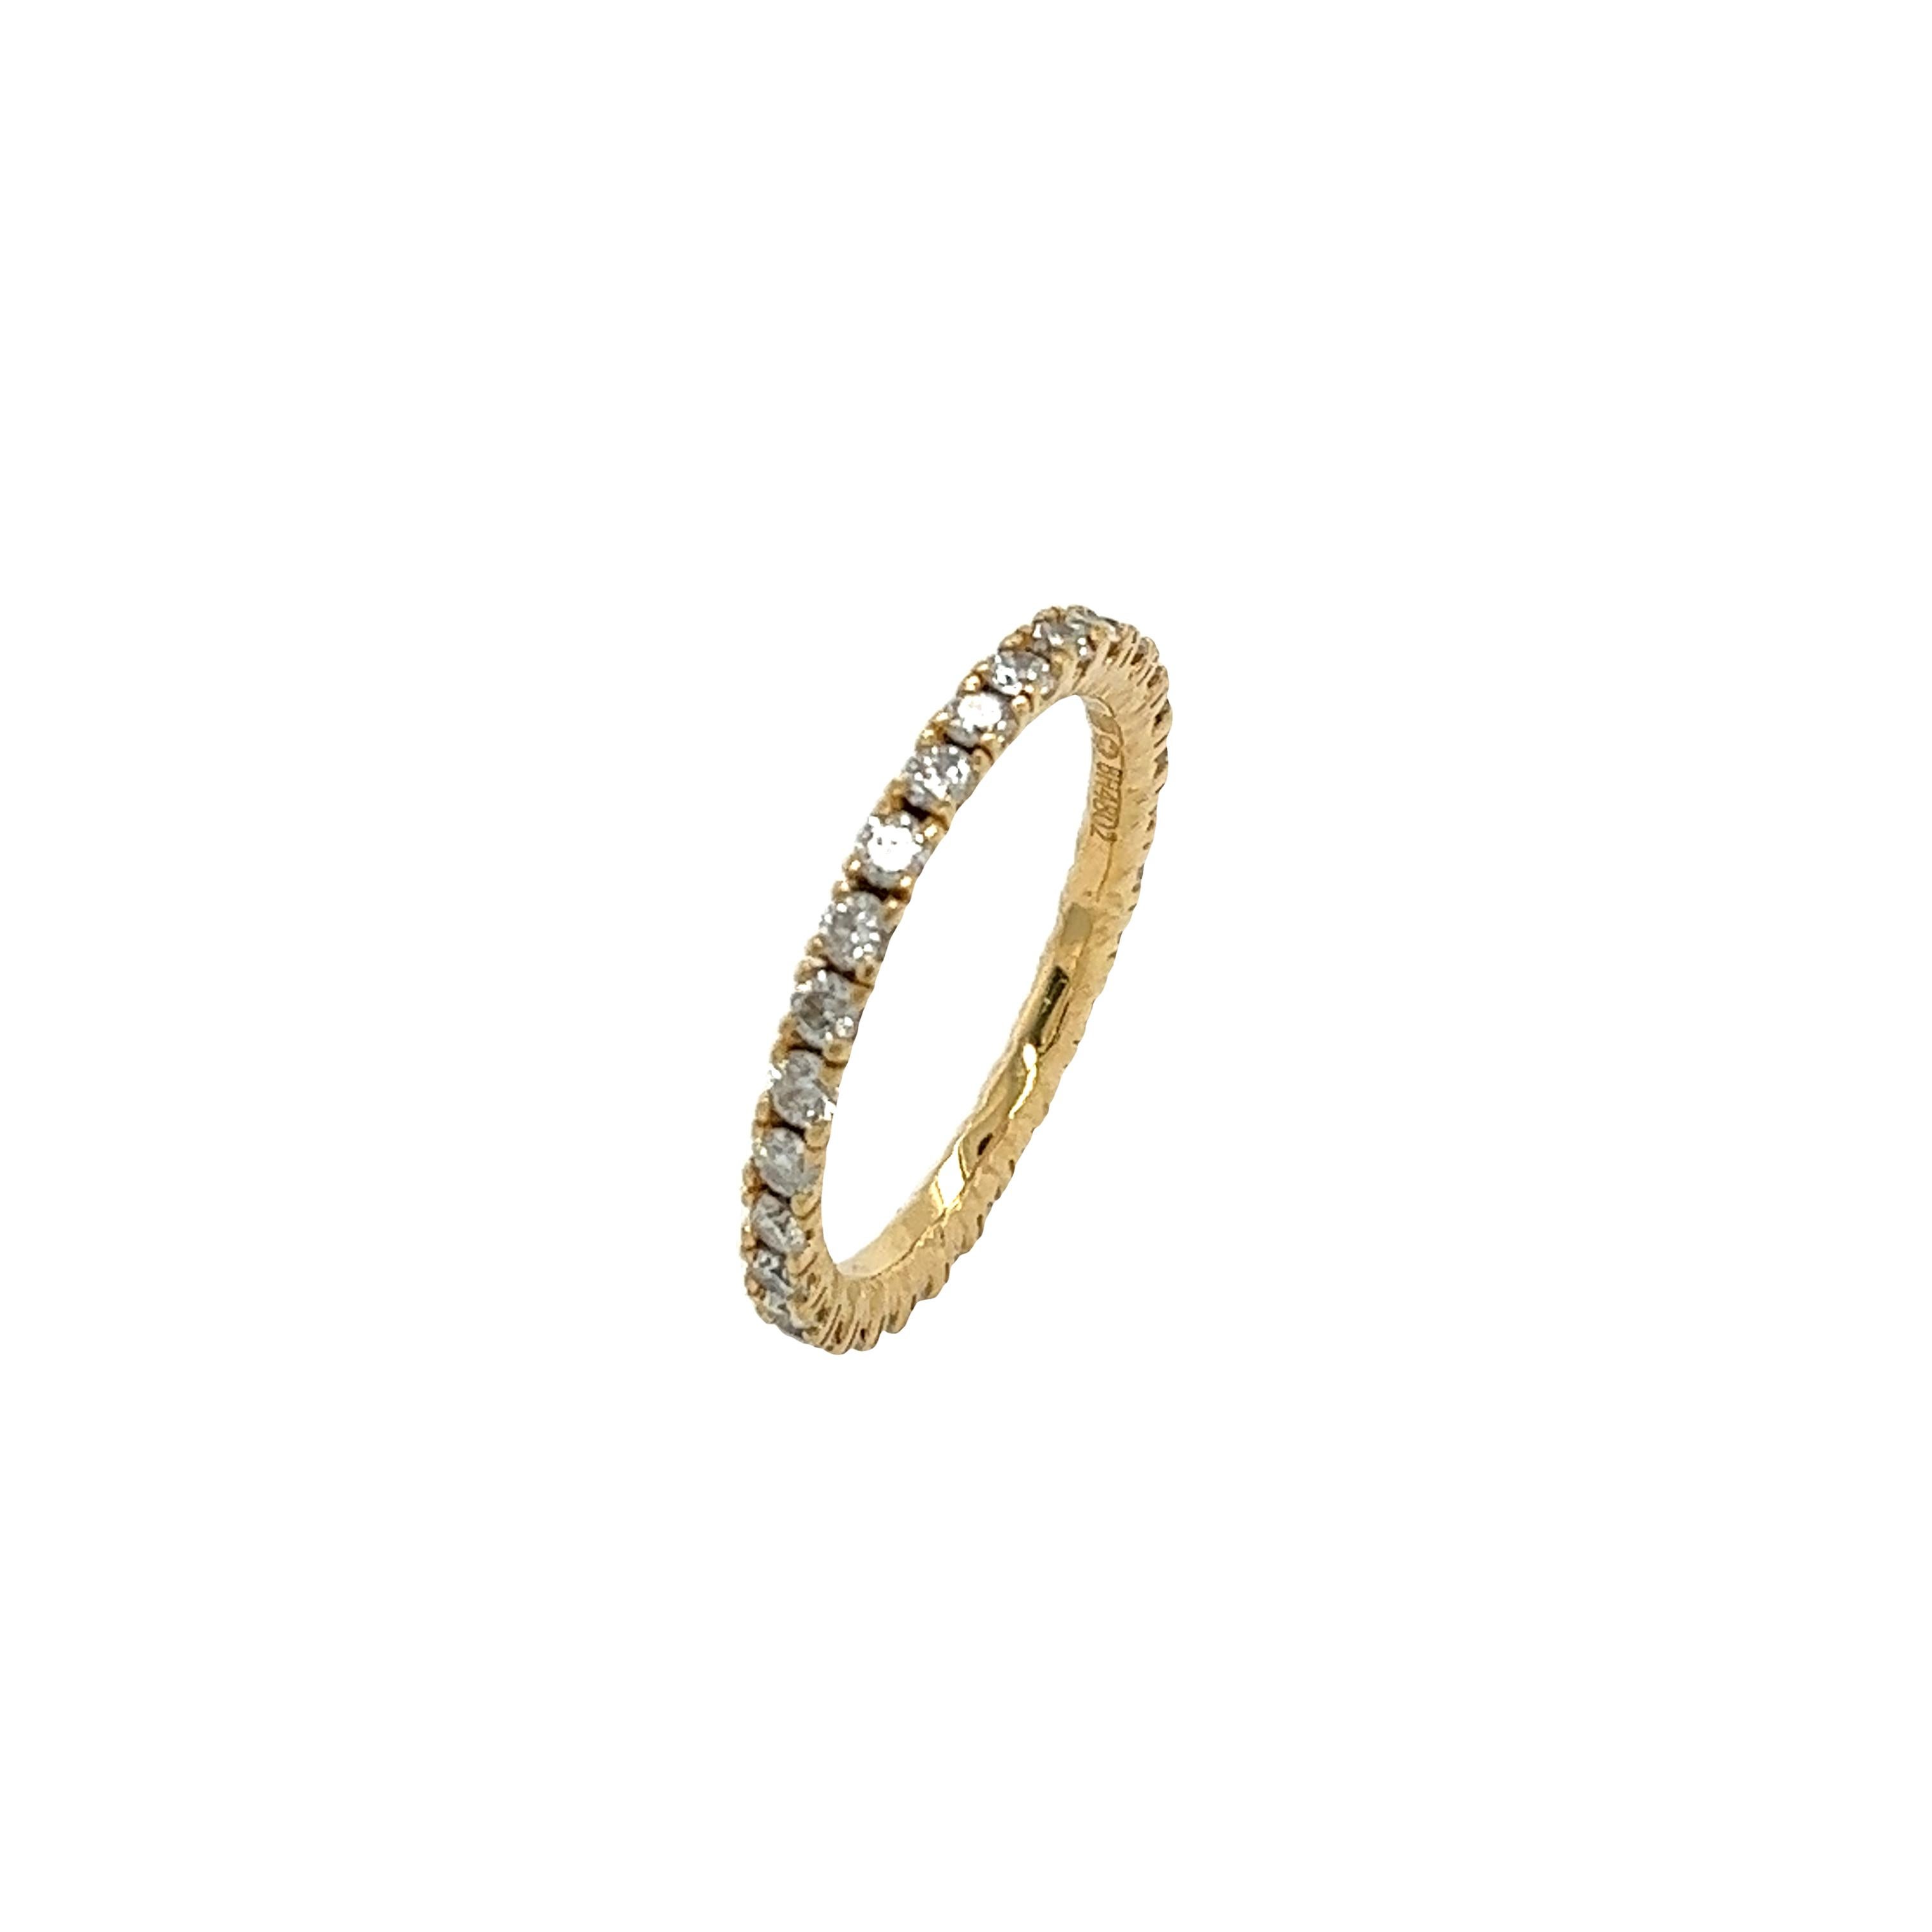 Browns 18ct Yellow Gold Diamond Full Eternity Ring Set With 0.90ct For Sale 1